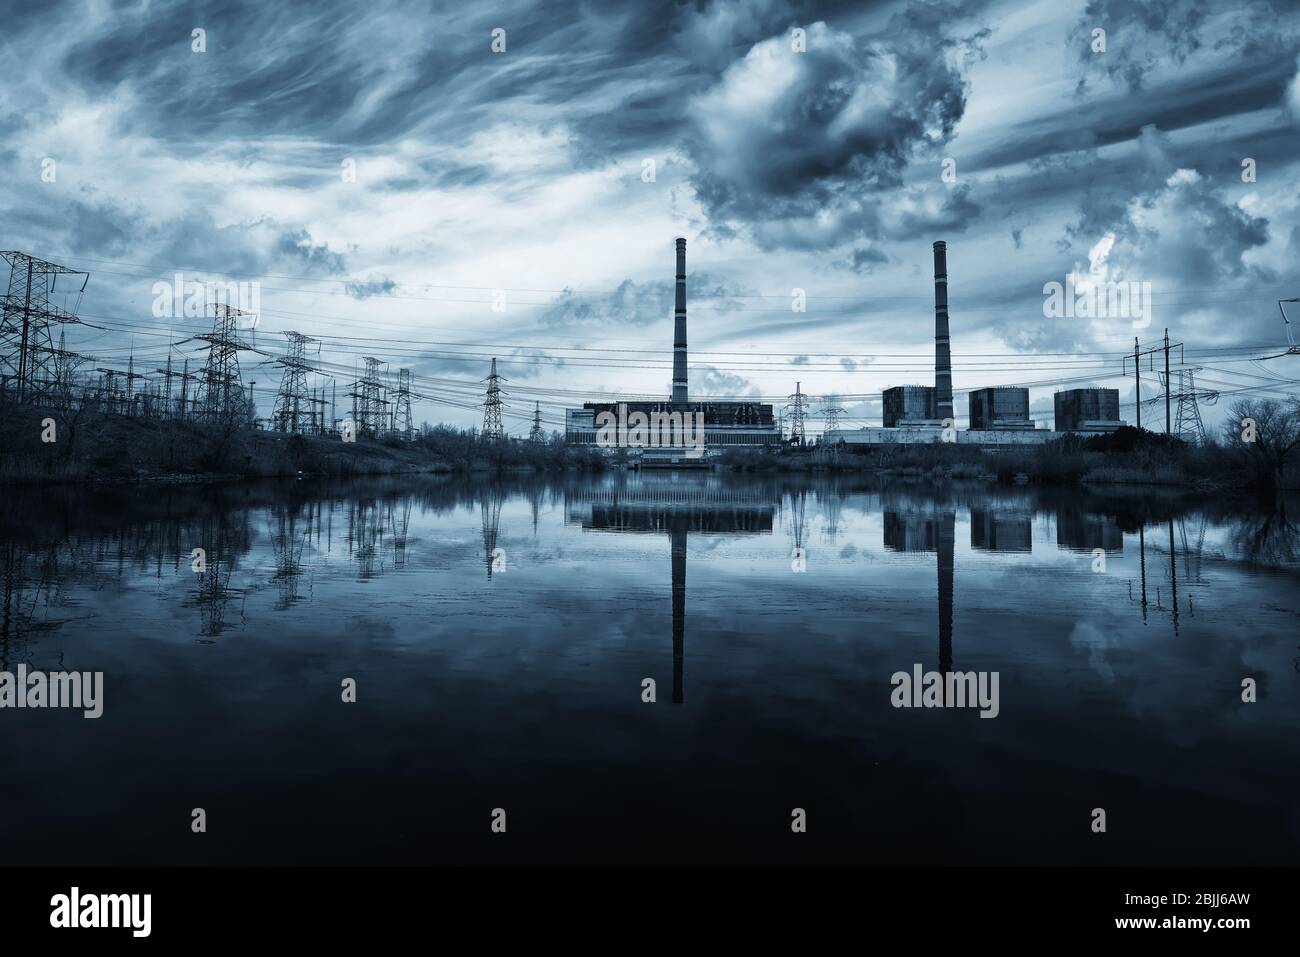 Industrial thermal power plant with smokestack Stock Photo